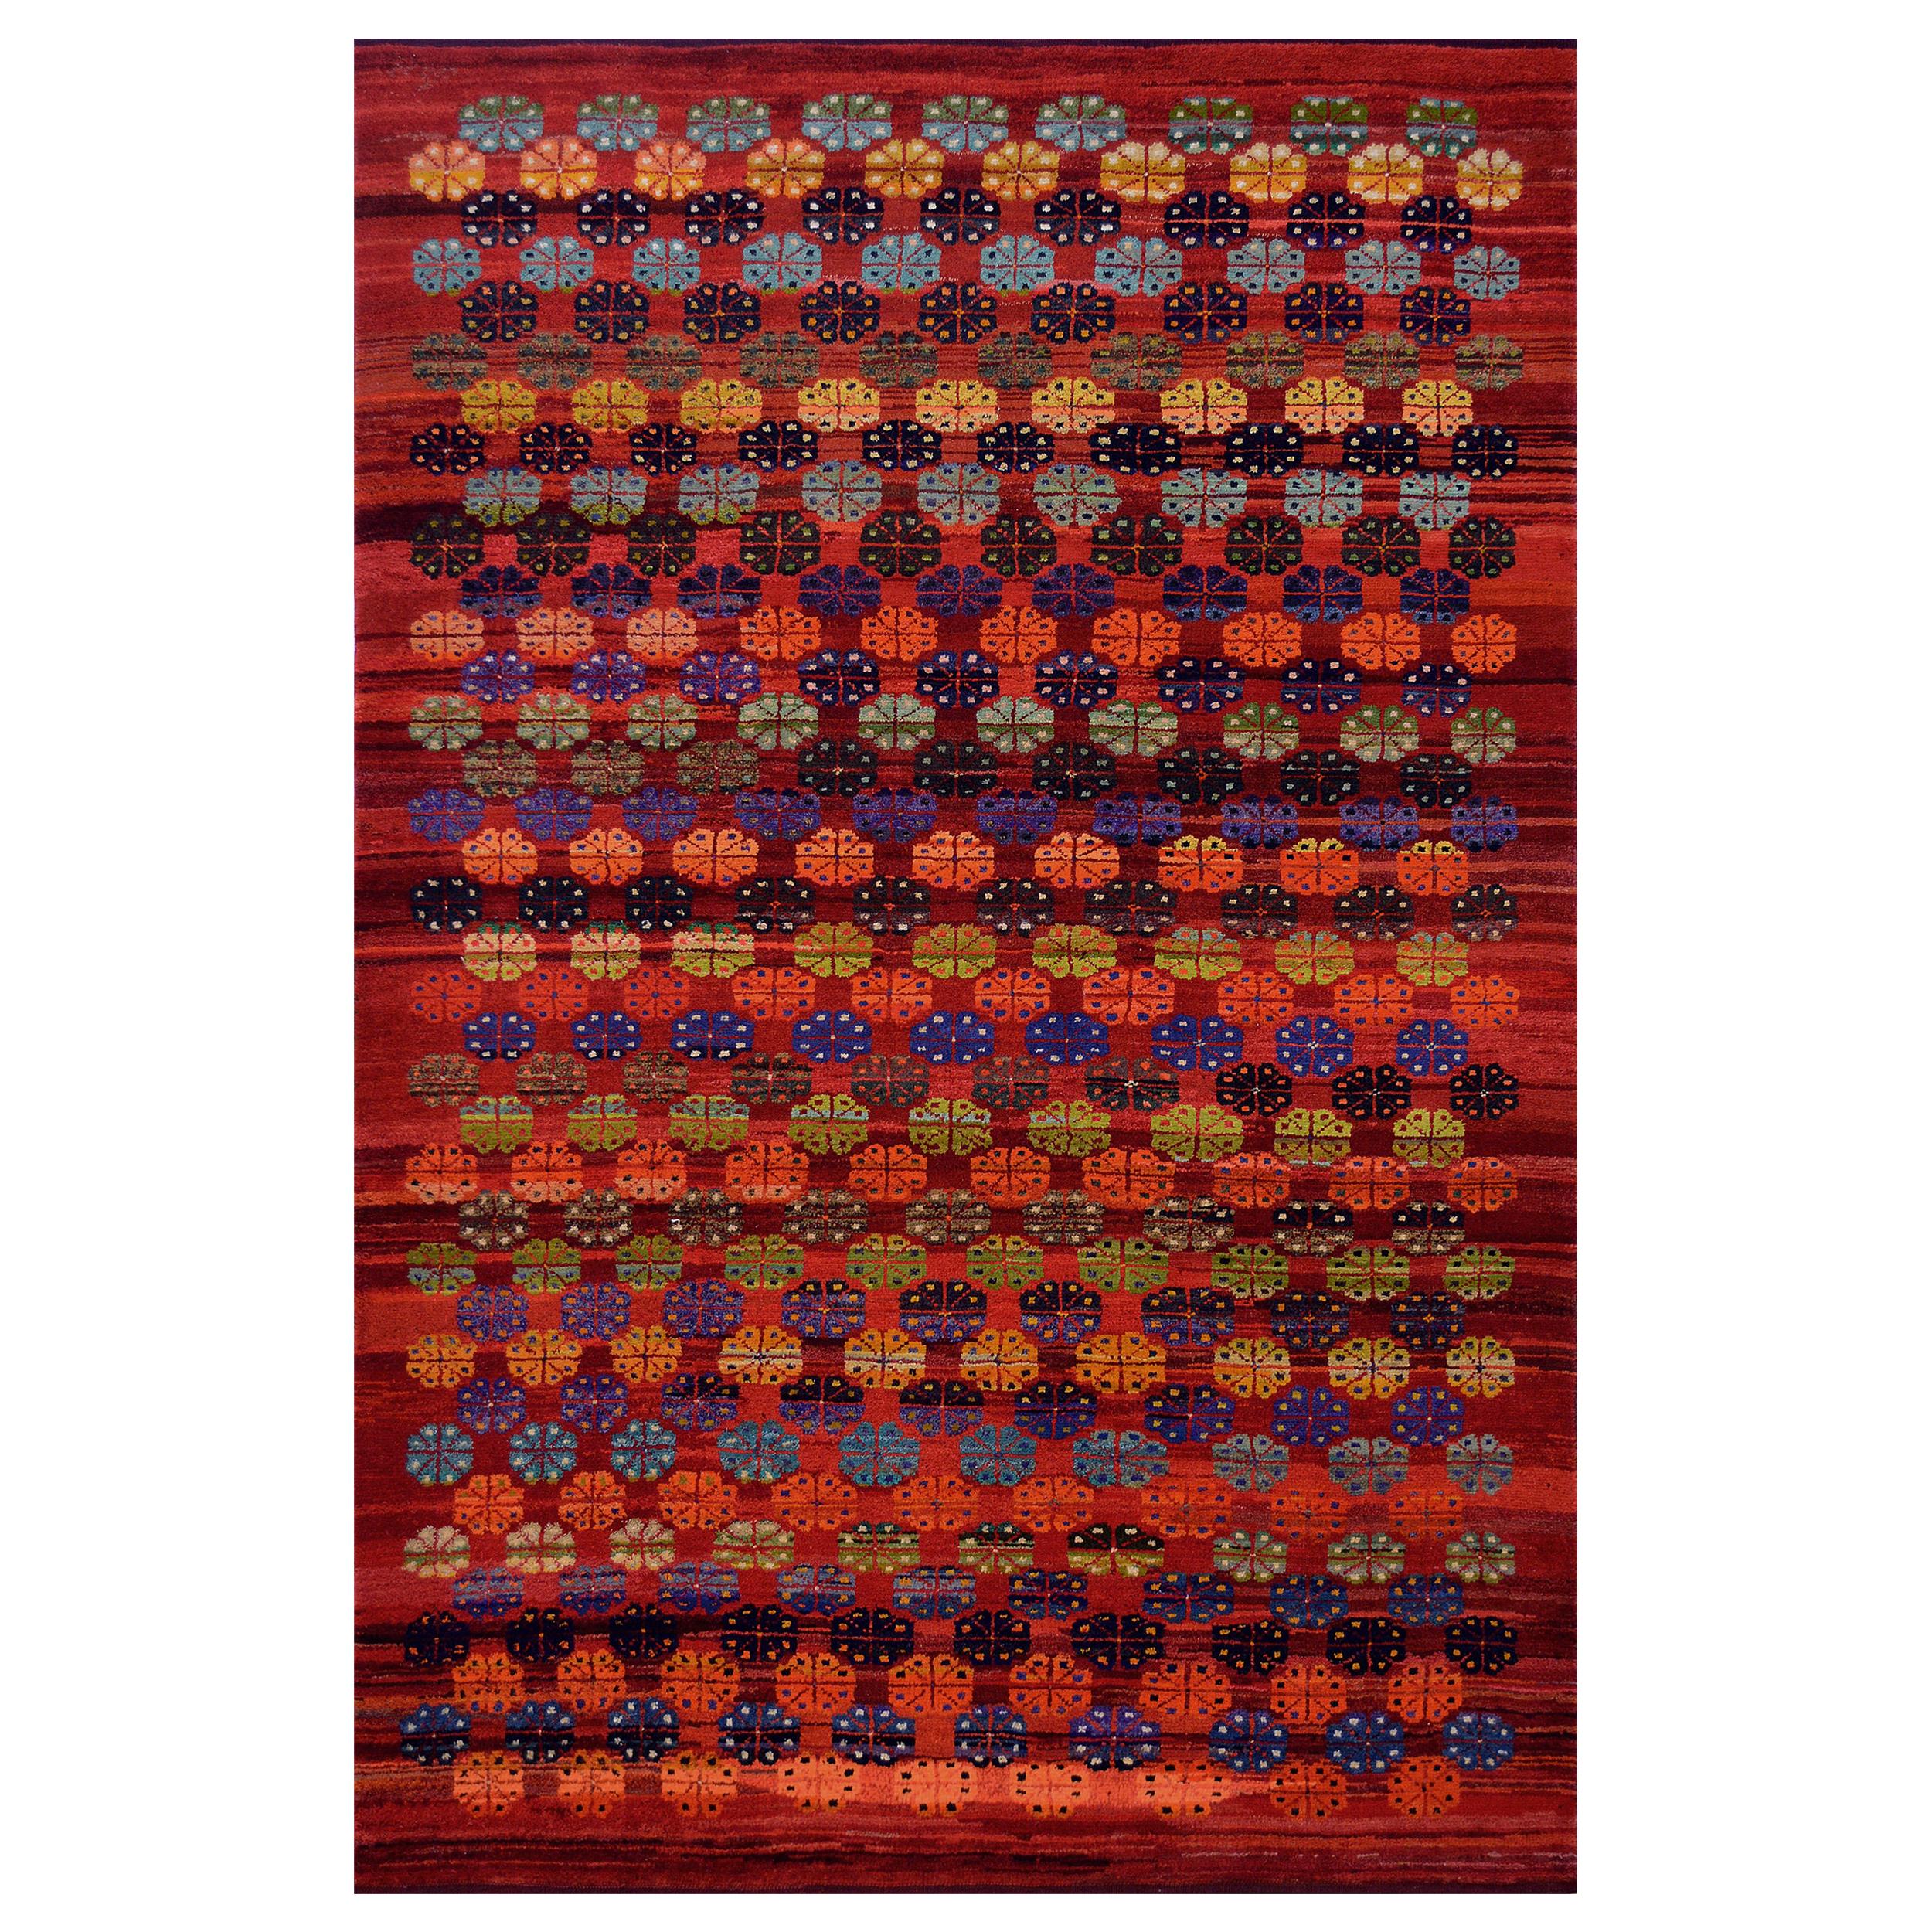 Tomato-Red Handwoven Wool Turkish Rug For Sale